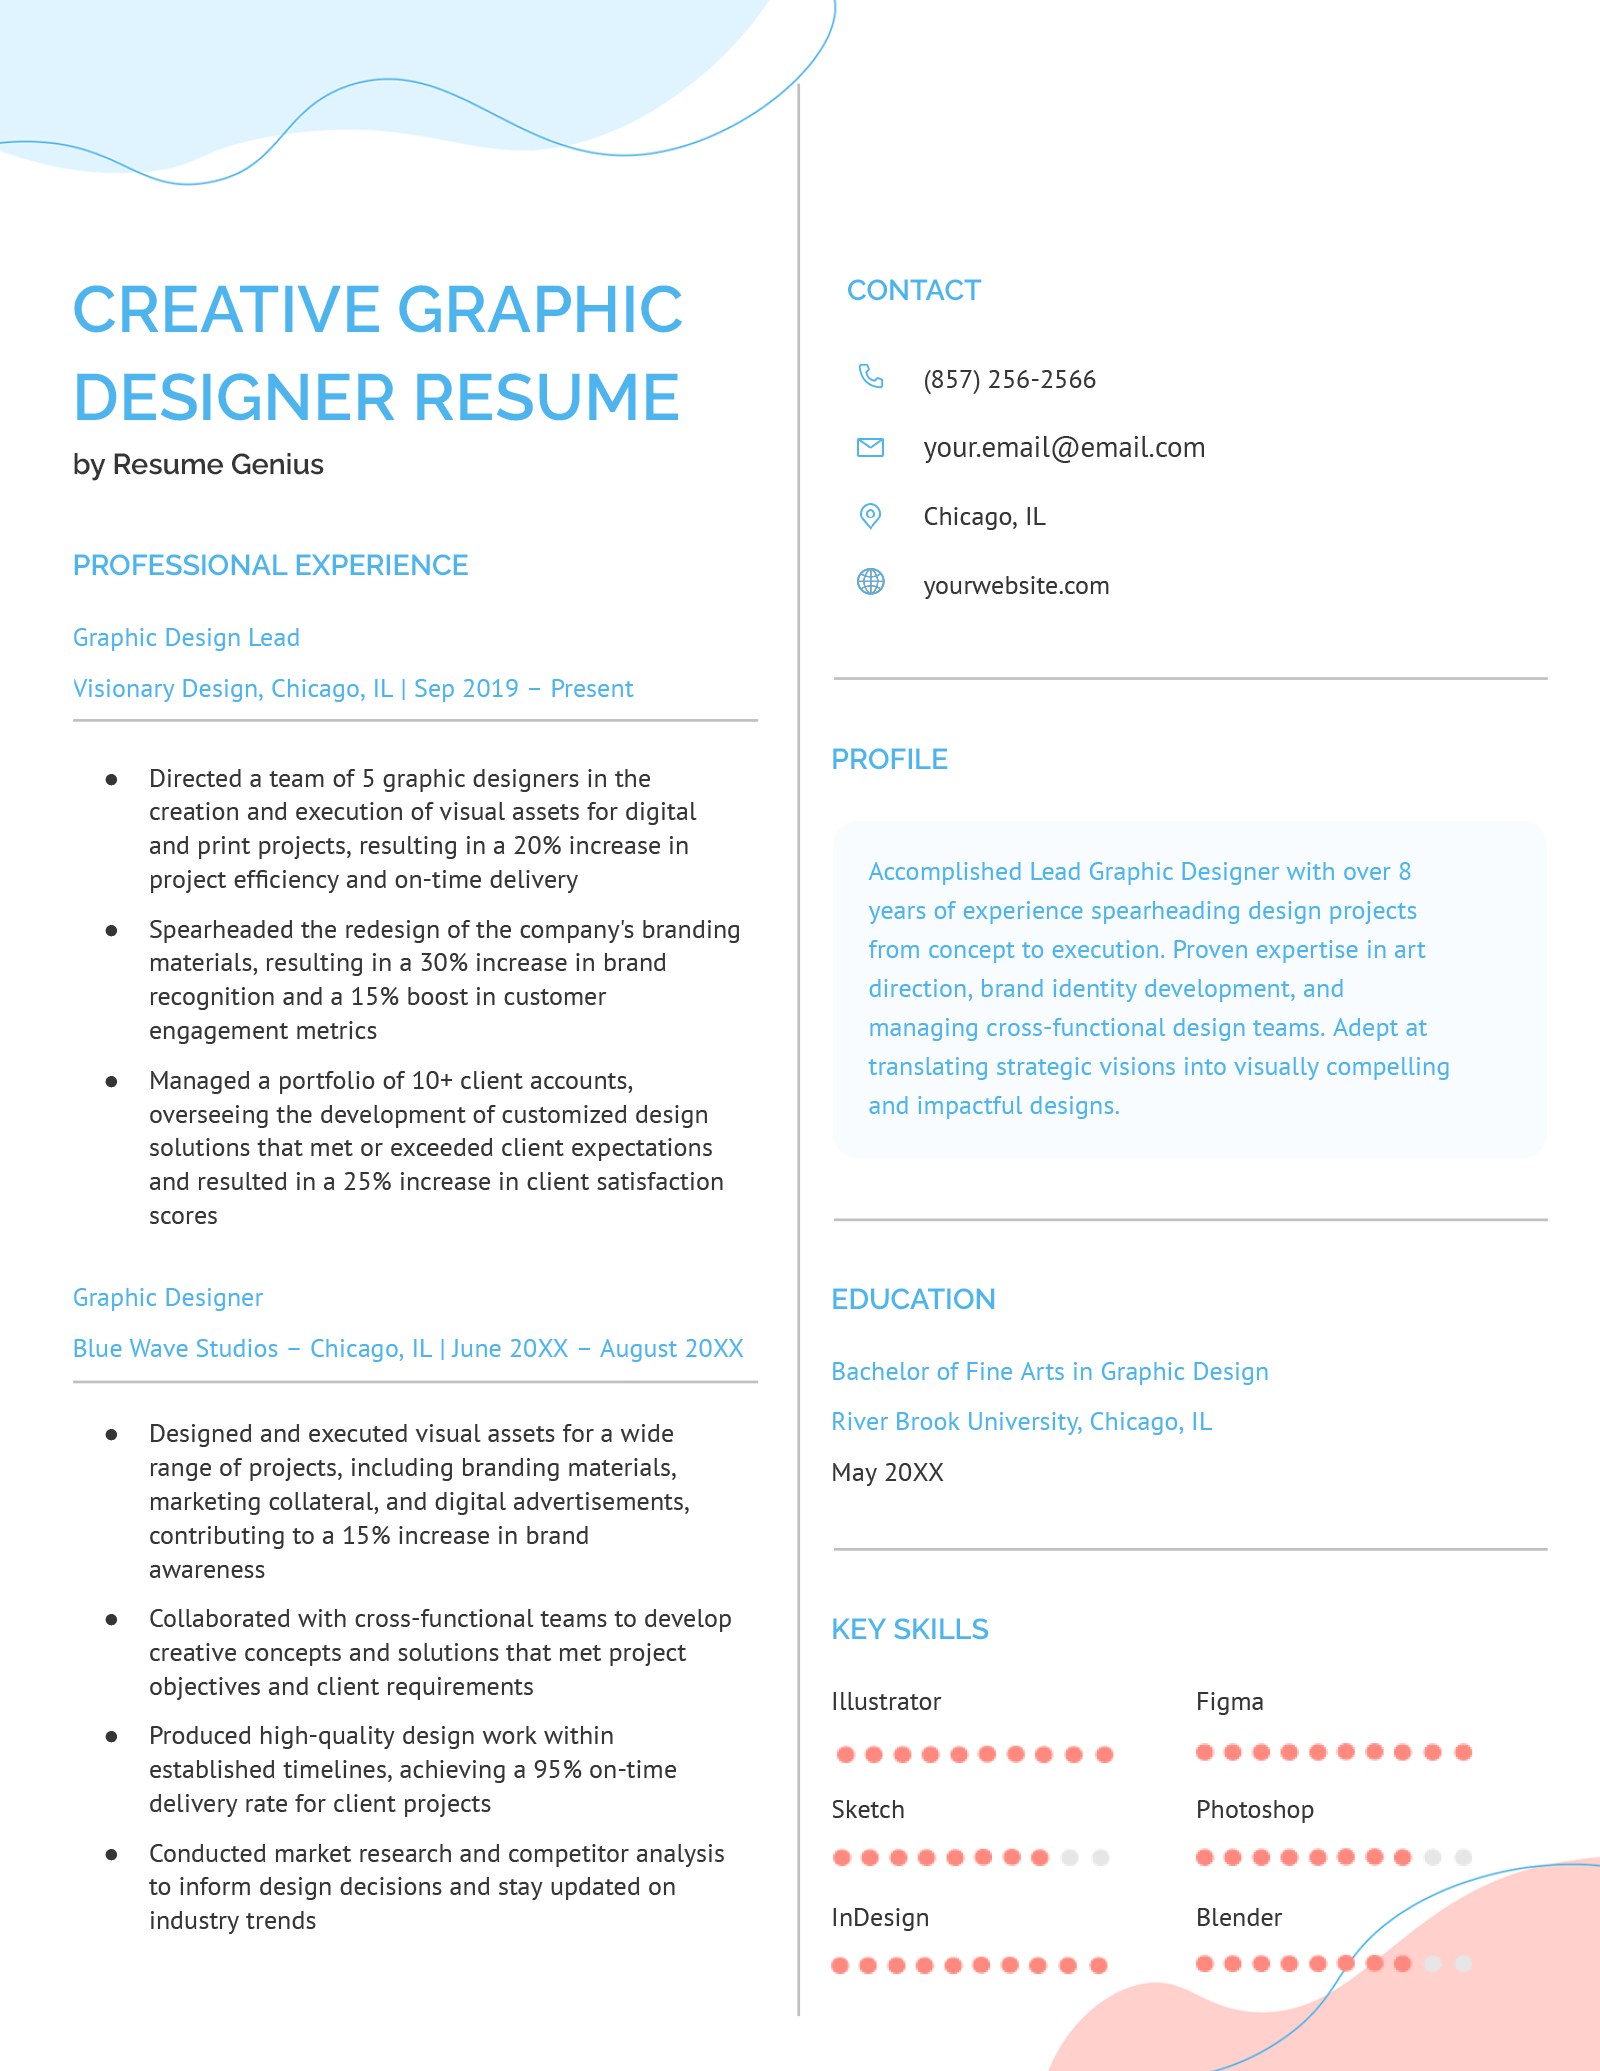 An example of a creative graphic design resume.